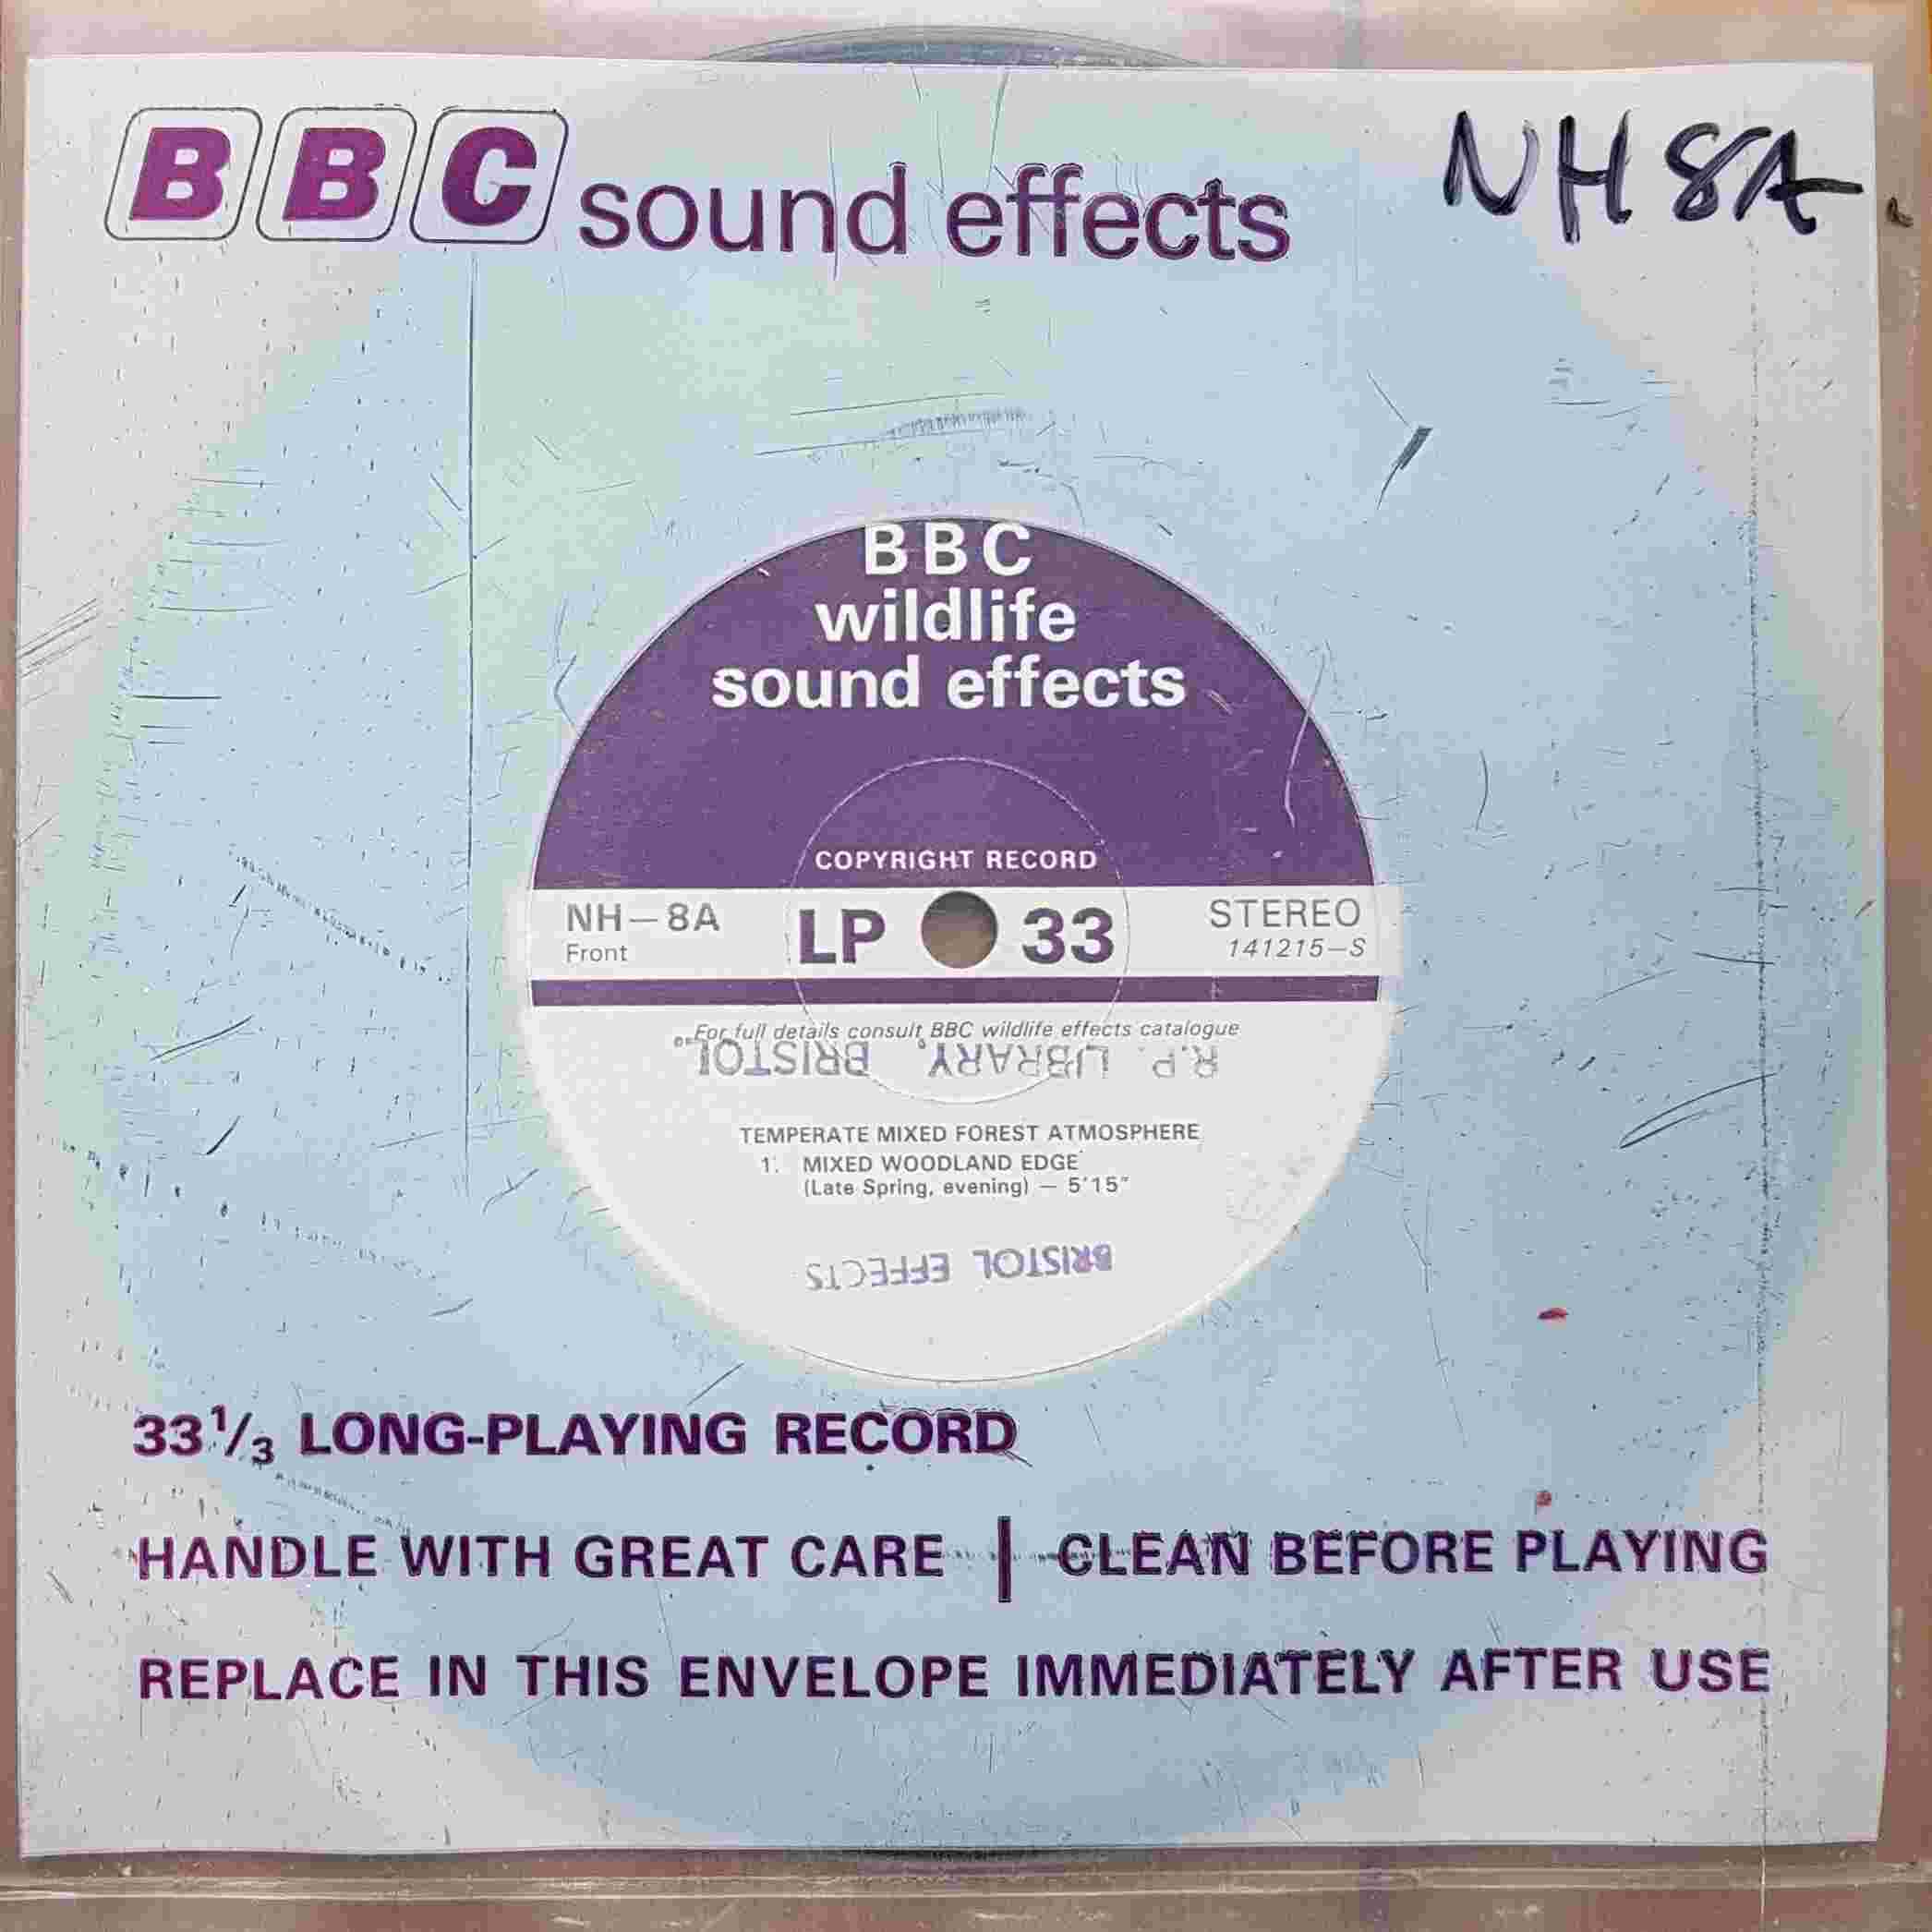 Picture of NH 8A Temperature mixed forest atmosphere by artist Not registered from the BBC singles - Records and Tapes library